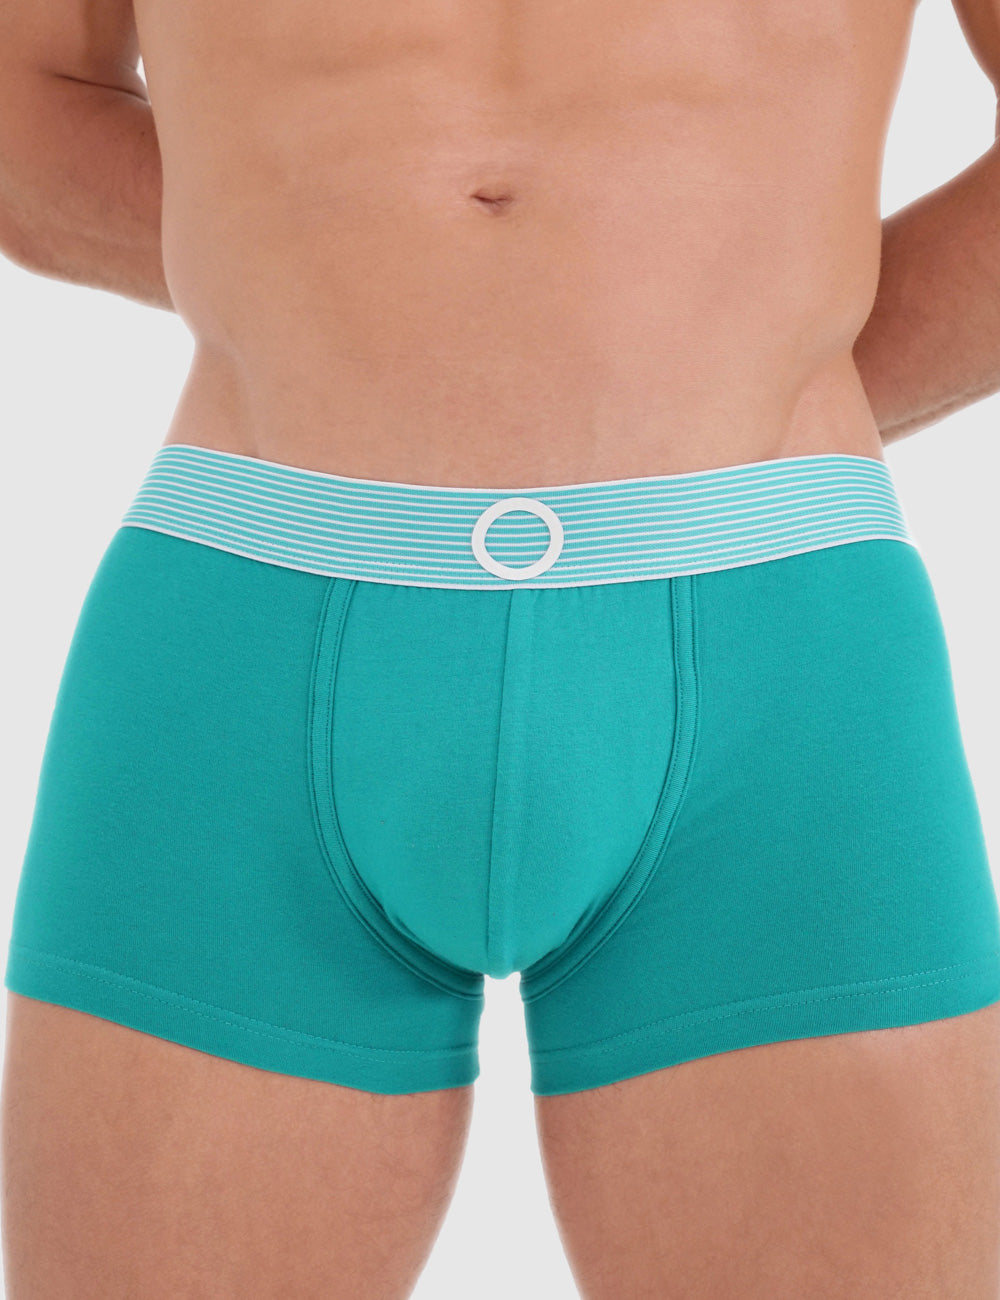 OMAZING Padded Trunk